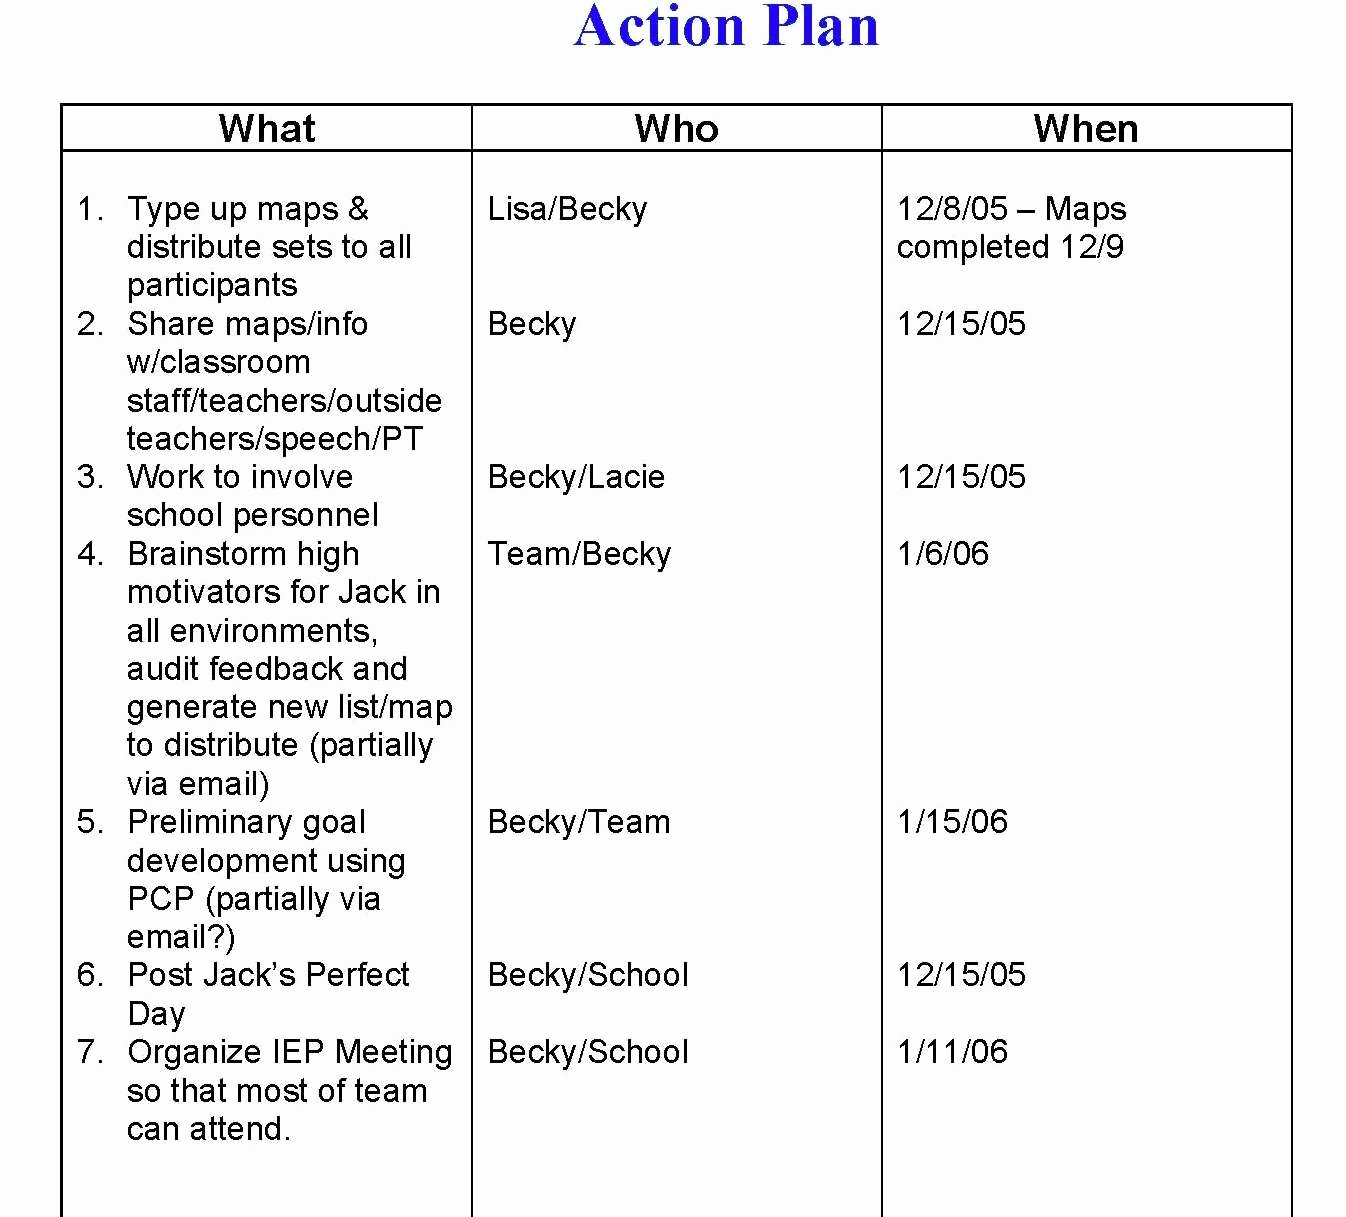 Action Plan Template Education Elegant Modules Addressing Special Education and Teacher Education